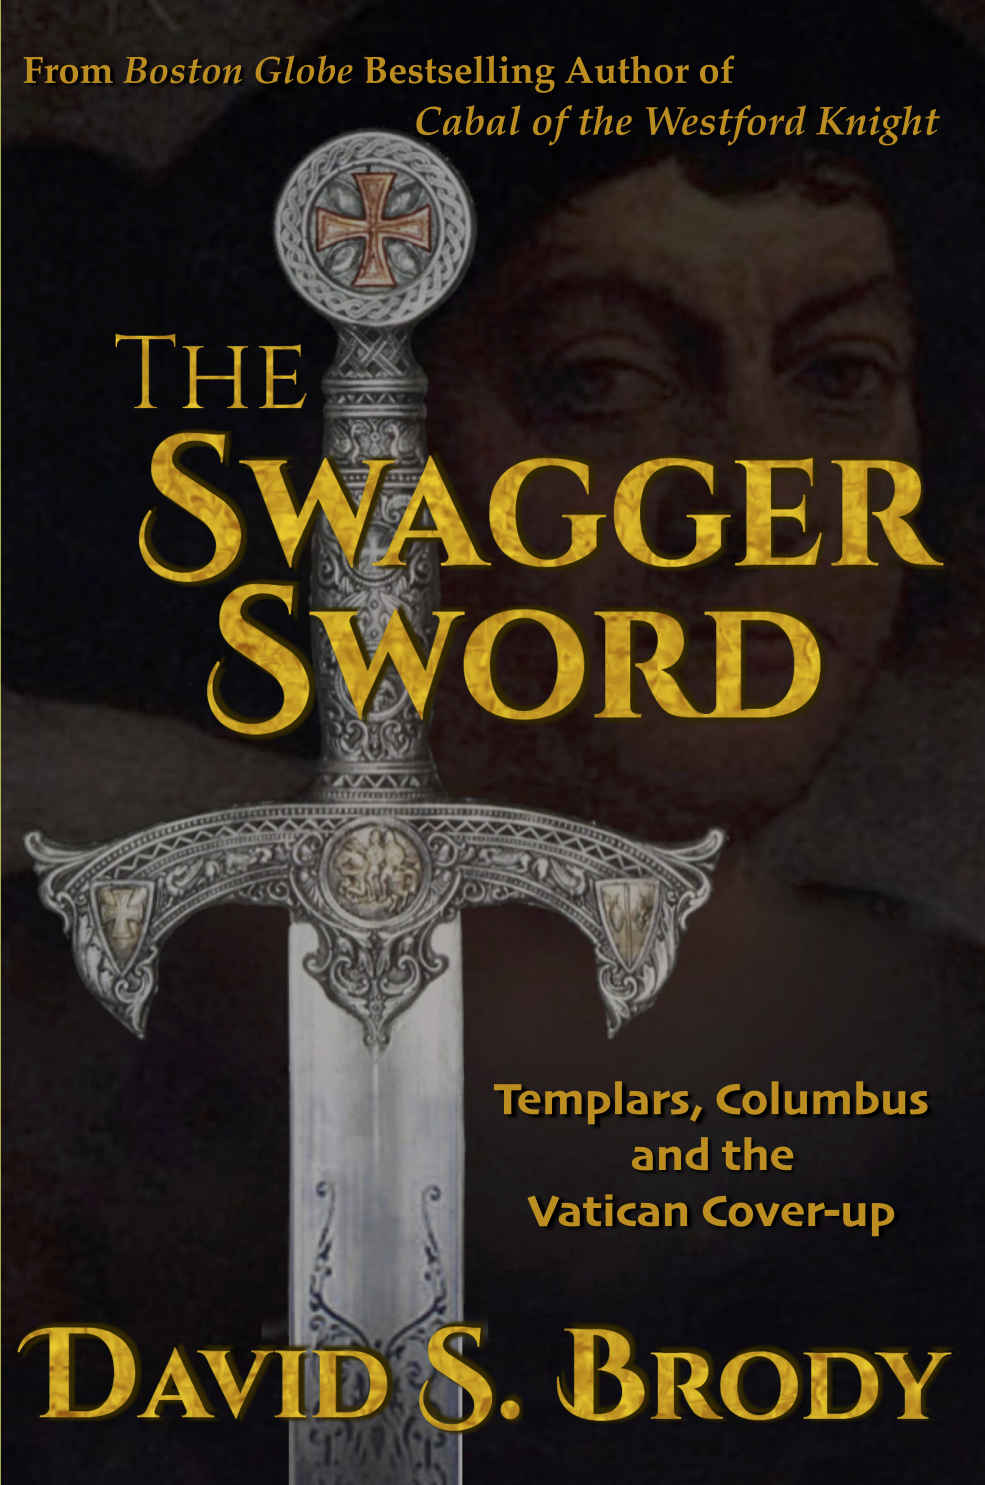 The Swagger Sword: Templars, Columbus and the Vatican Cover-Up